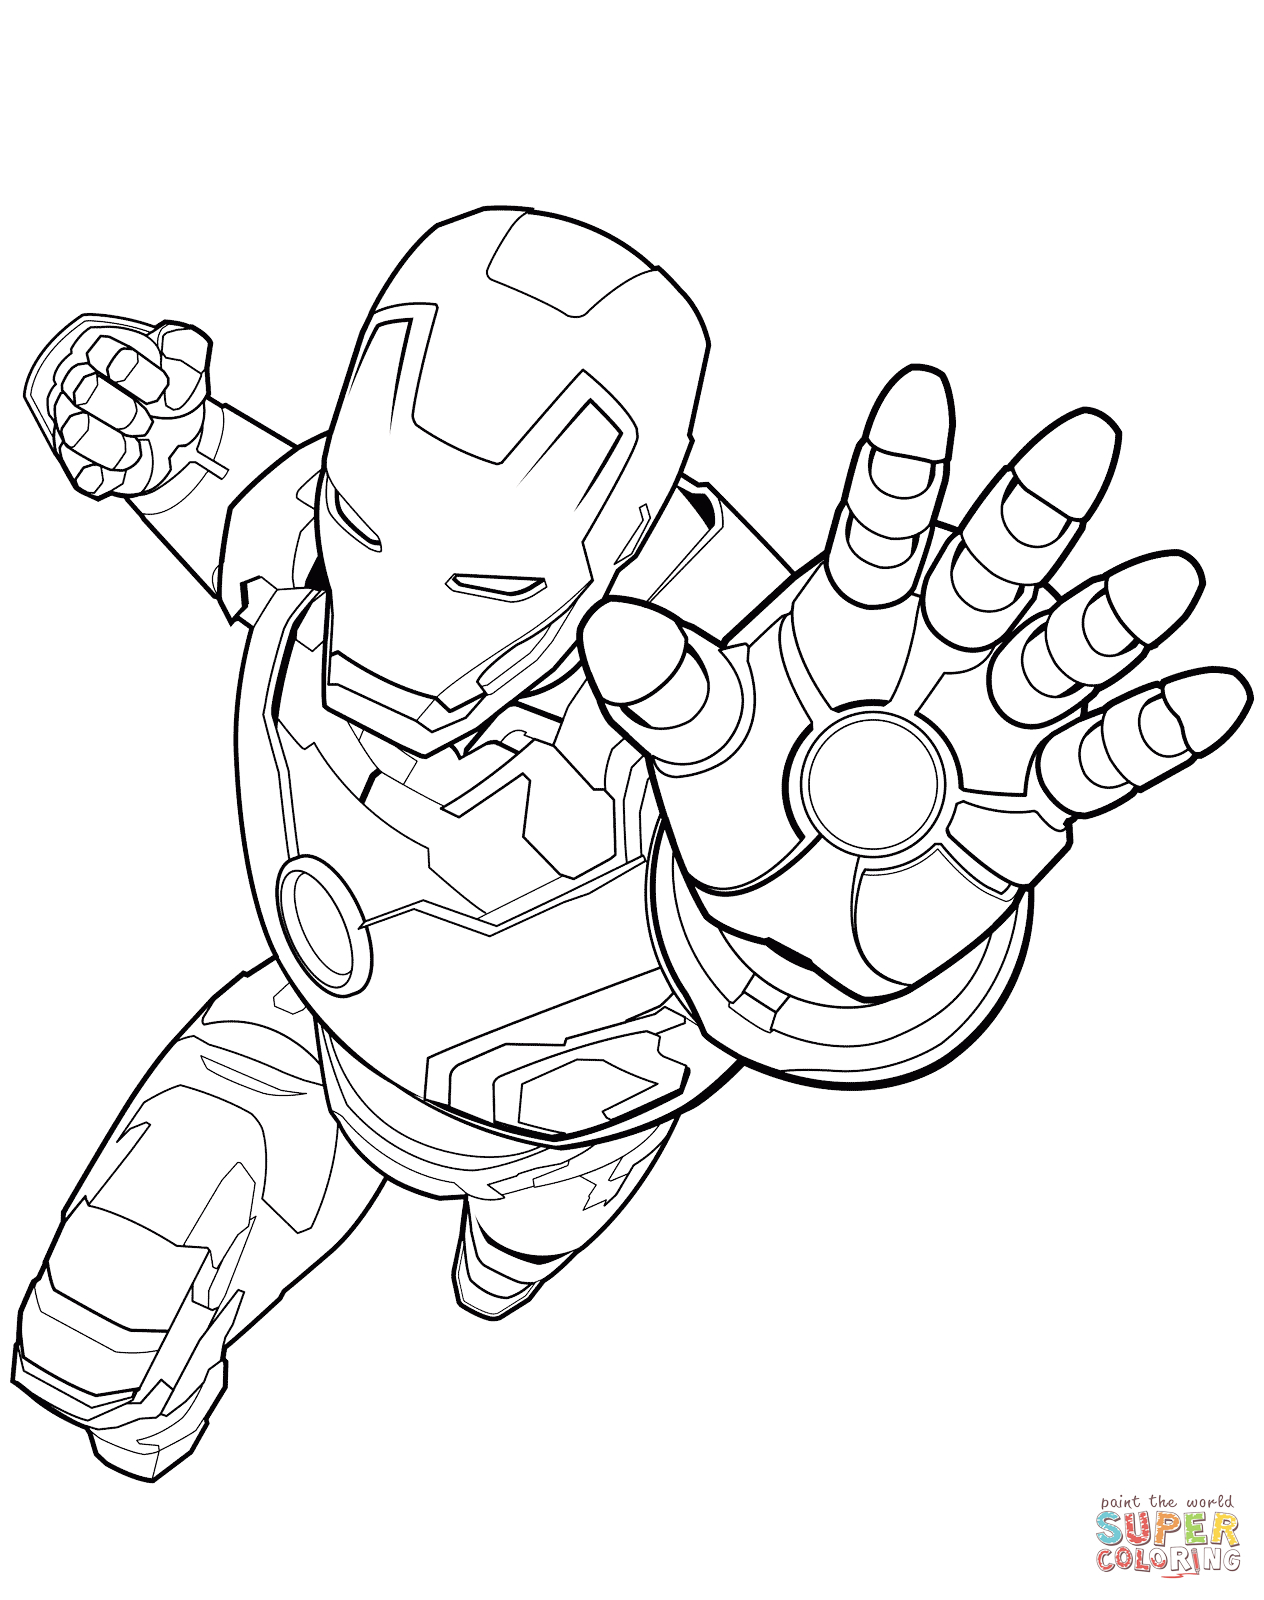 Iron Man Coloring Pages Online Avengers Iron Man Coloring Page Free Printable Coloring Pages